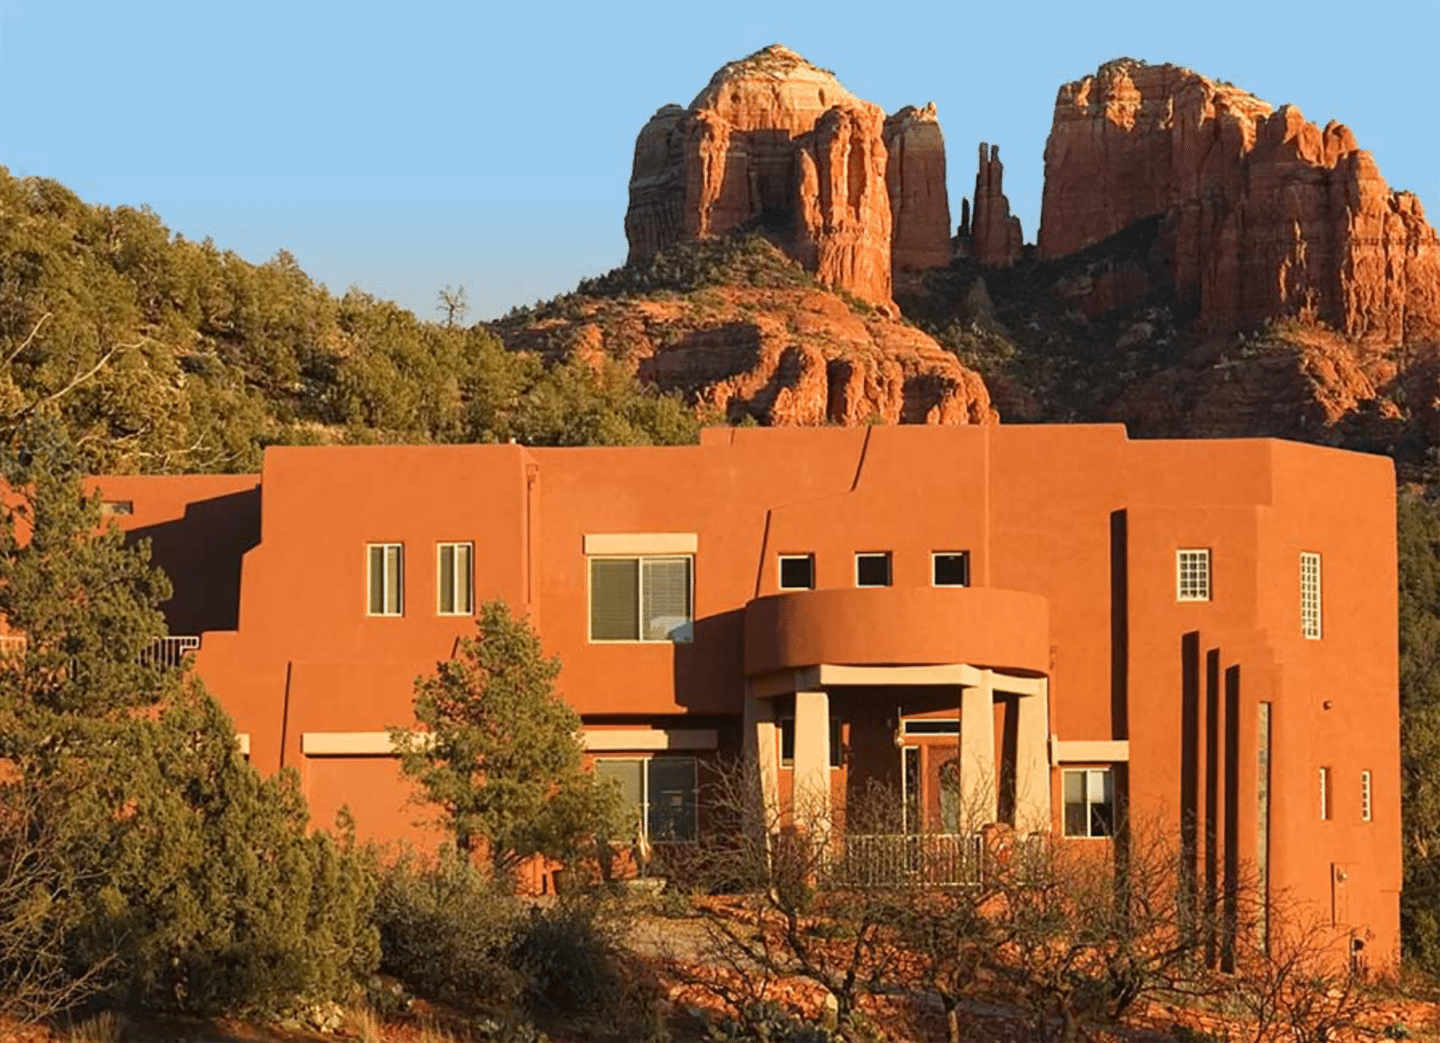 Best Sedona bed and breakfast picks, by travel blogger What The Fab